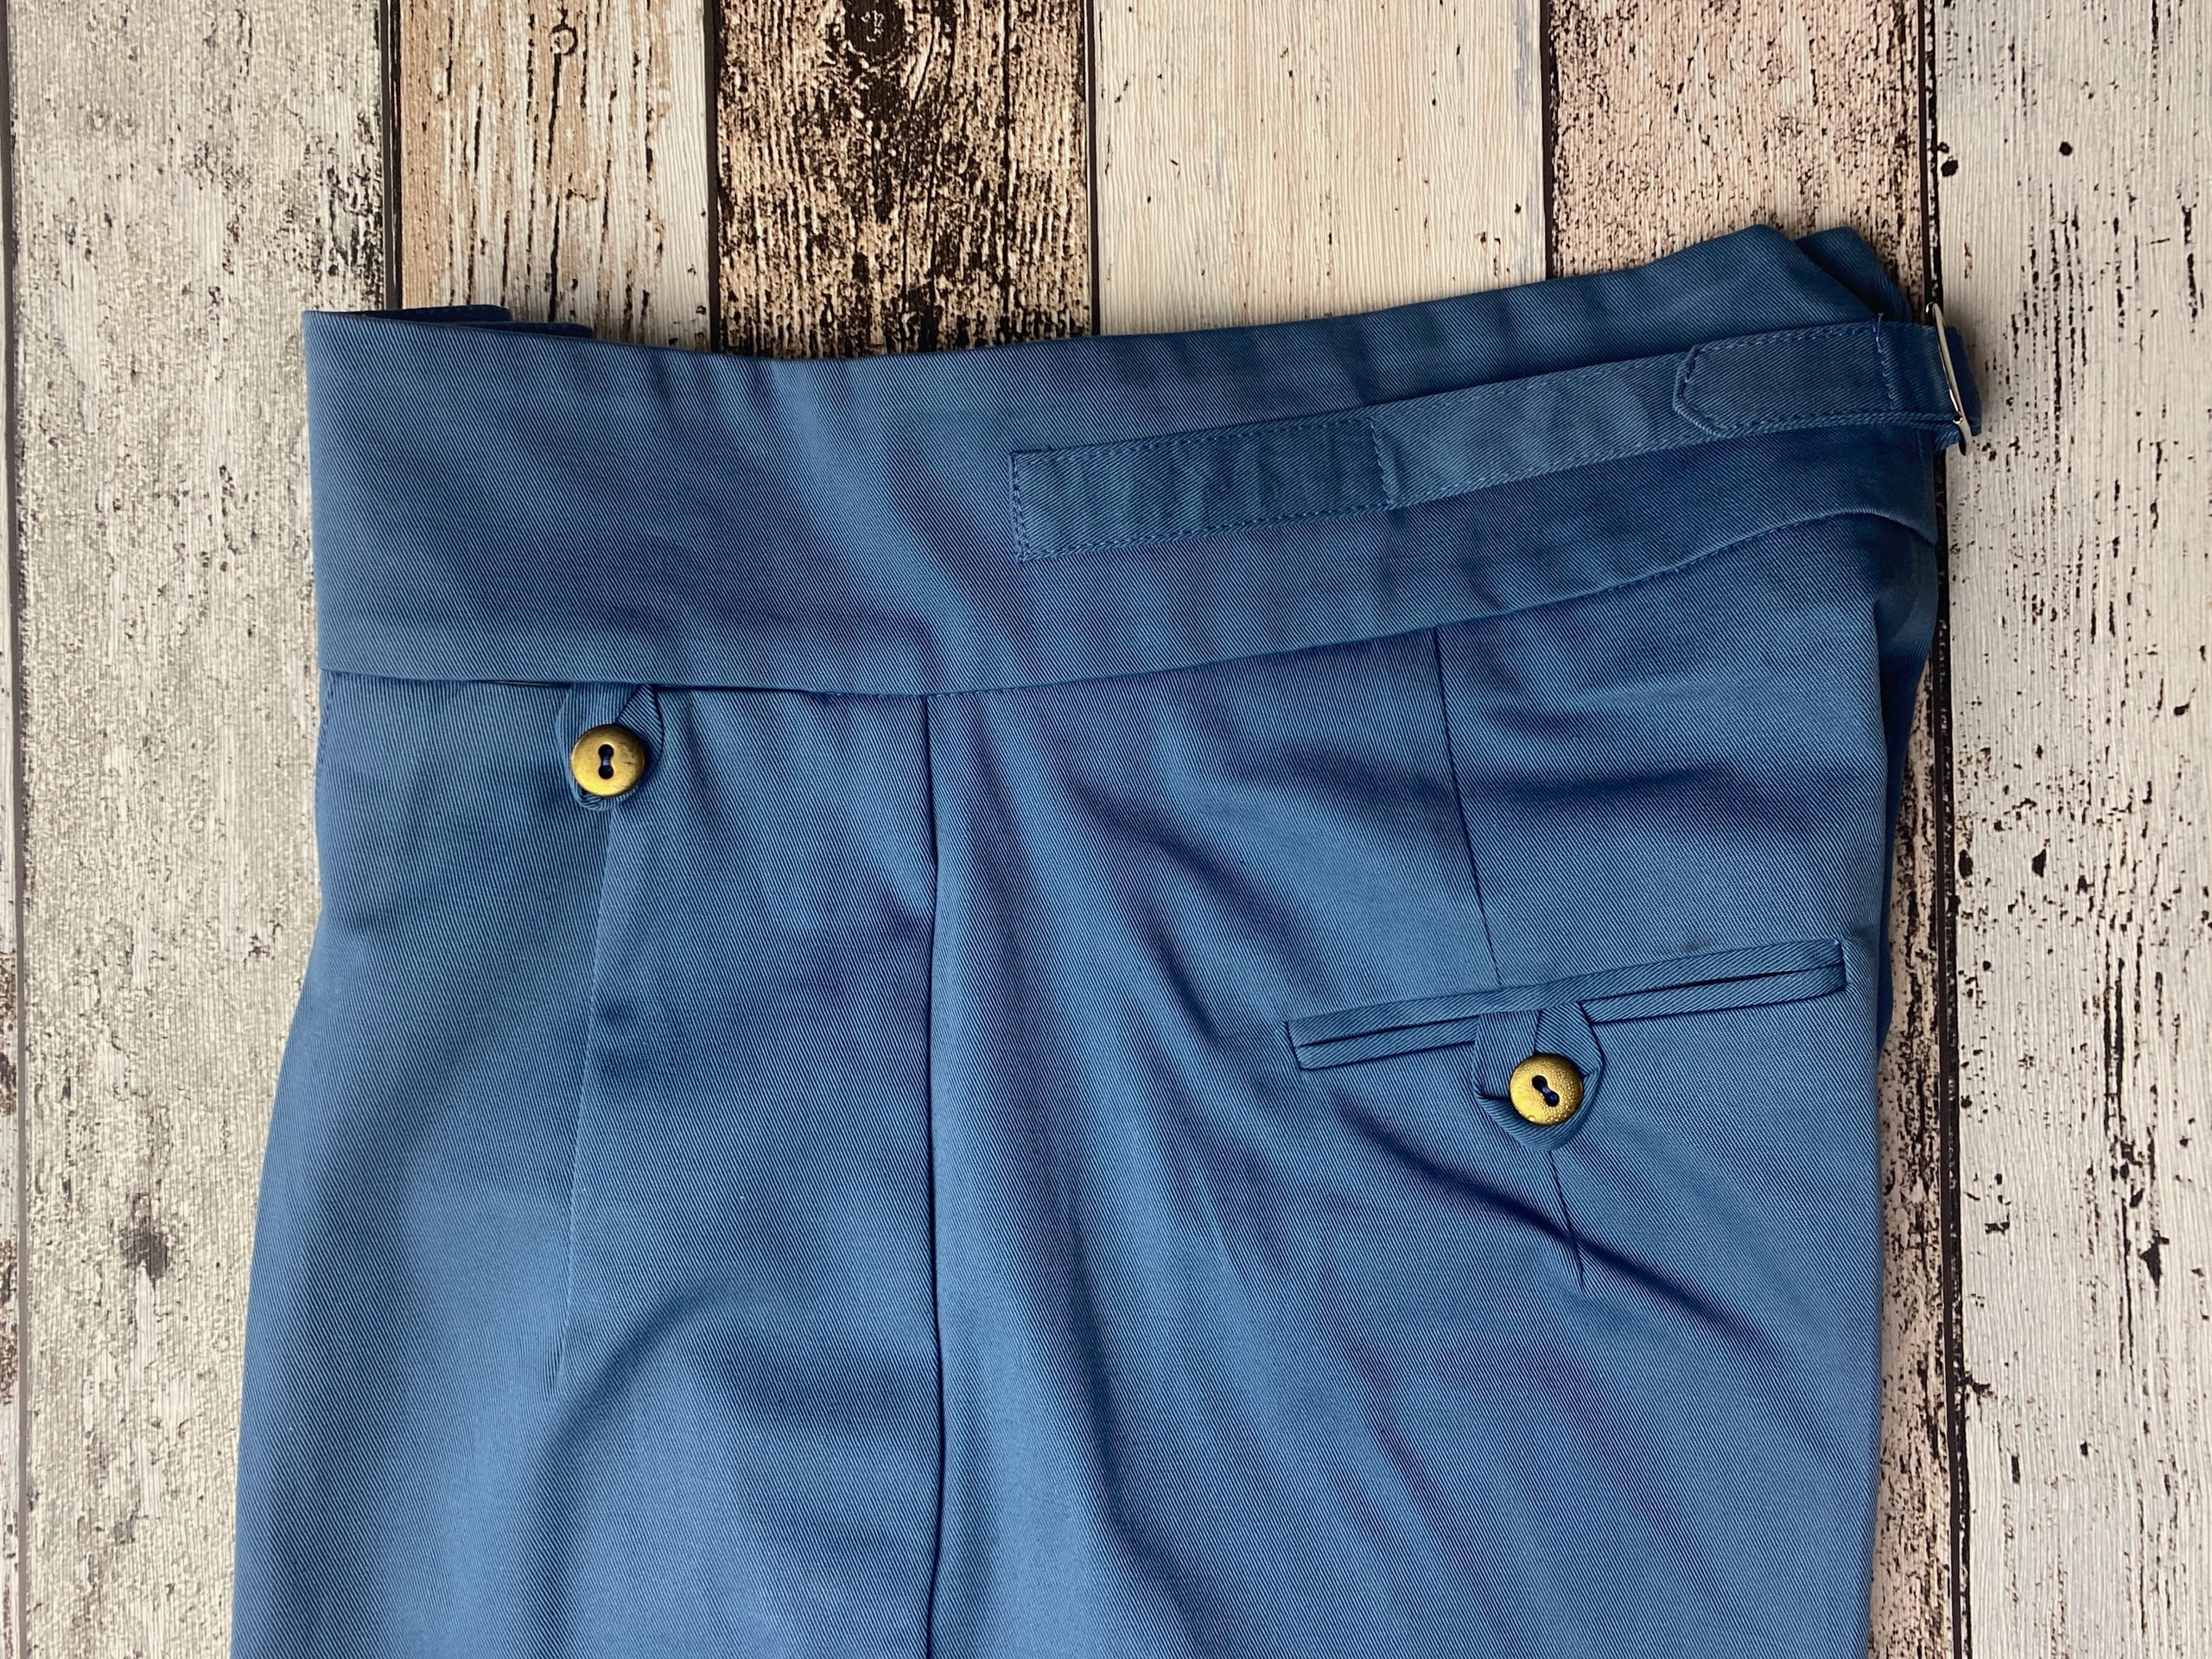 1930s high rise trousers, vintage style sport trousers, cRAF blue 1930s ...